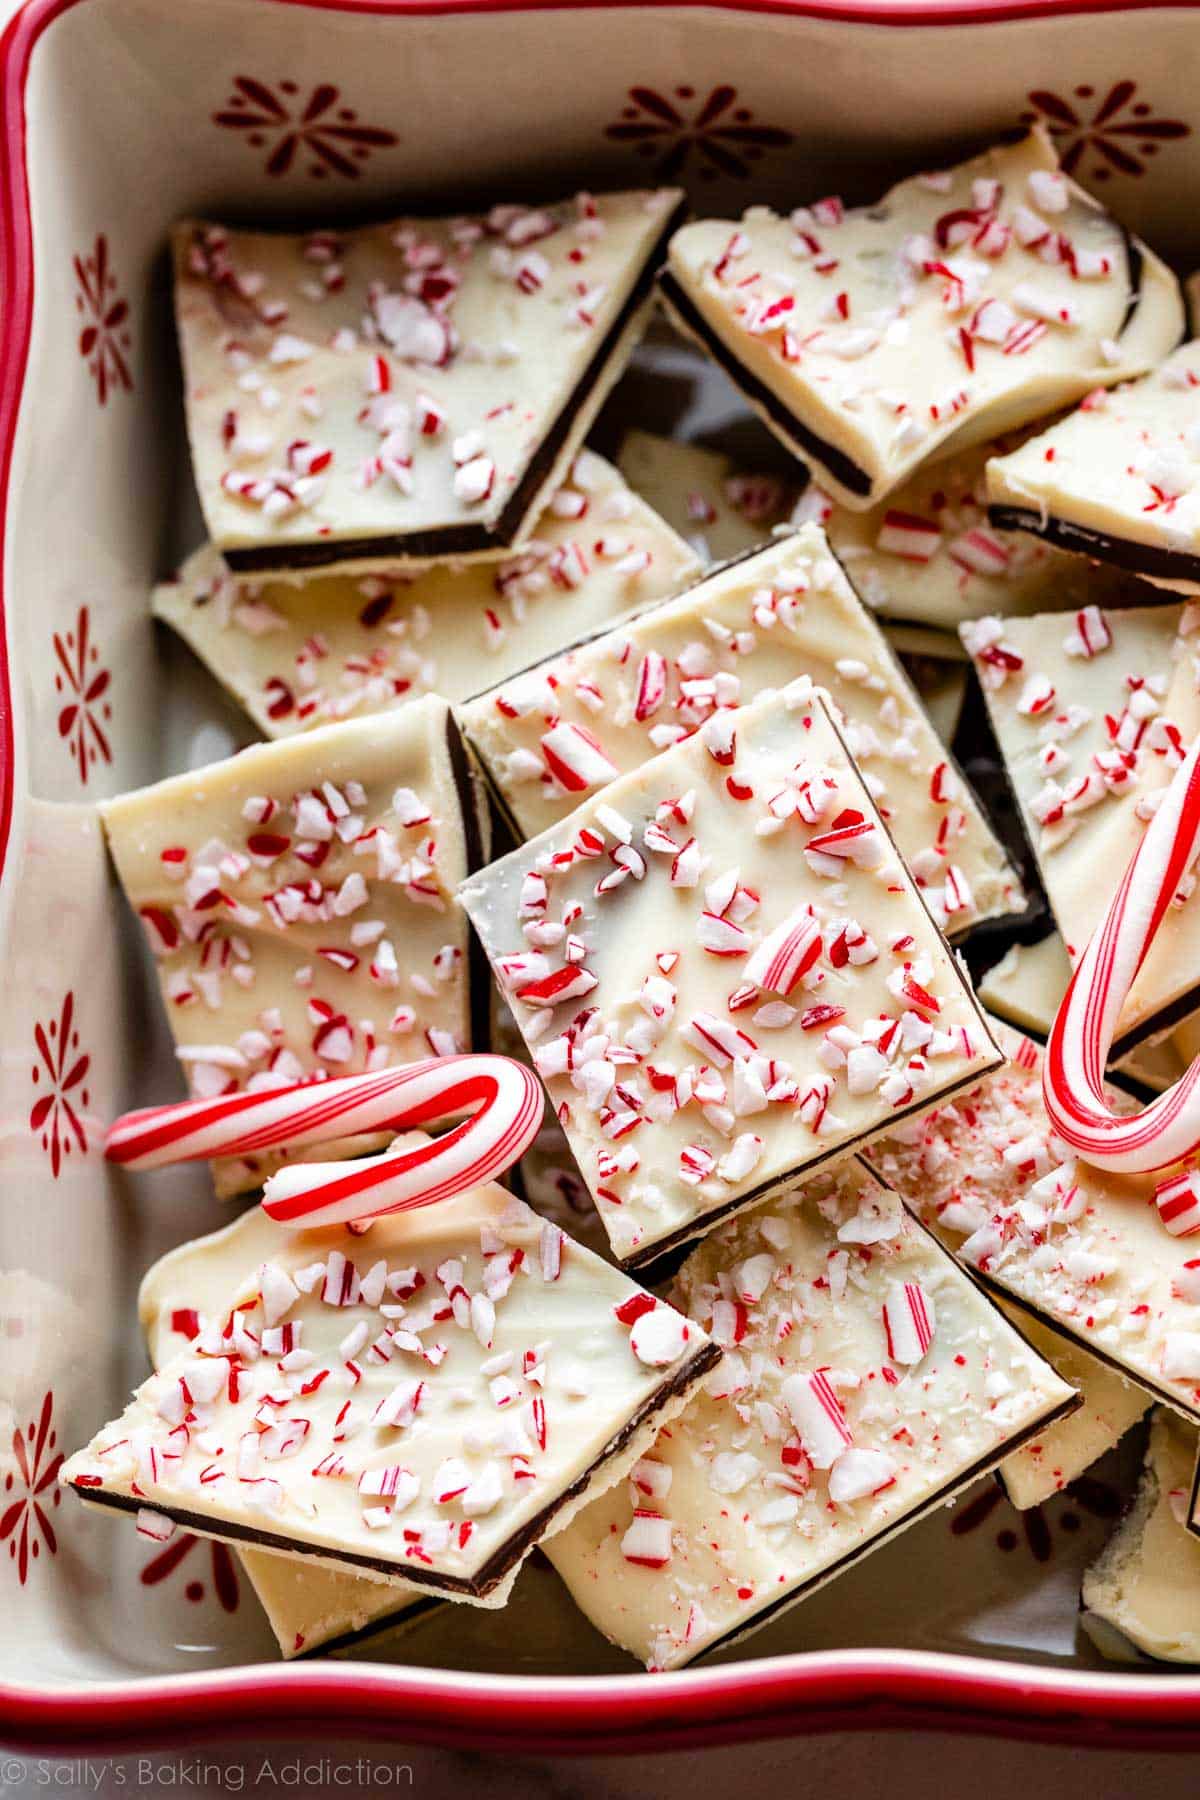 peppermint bark with crushed candy canes on top in a red and white baking dish.